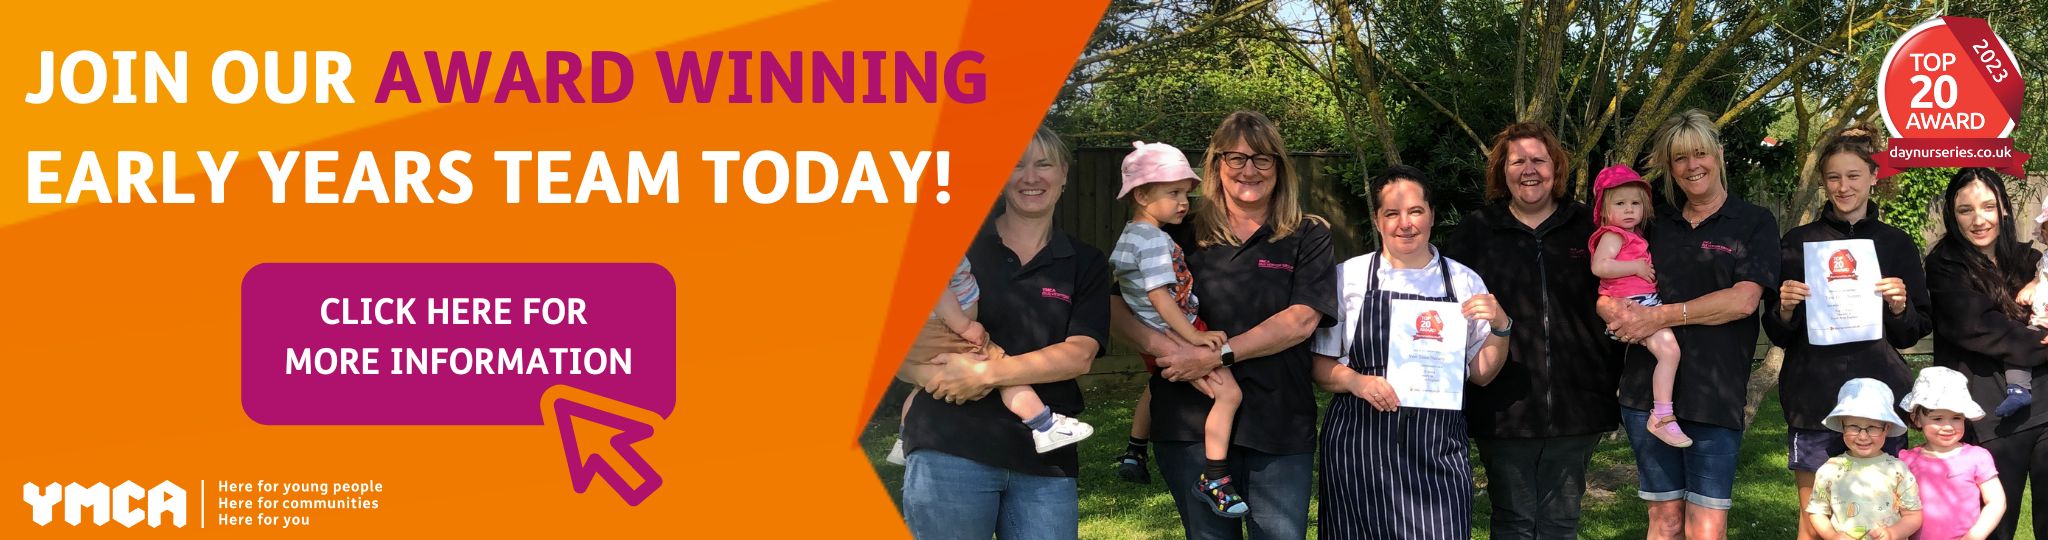 Image of nursery staff and children with large orange and pink graphic saying 'join our award winning team' with a click here button.